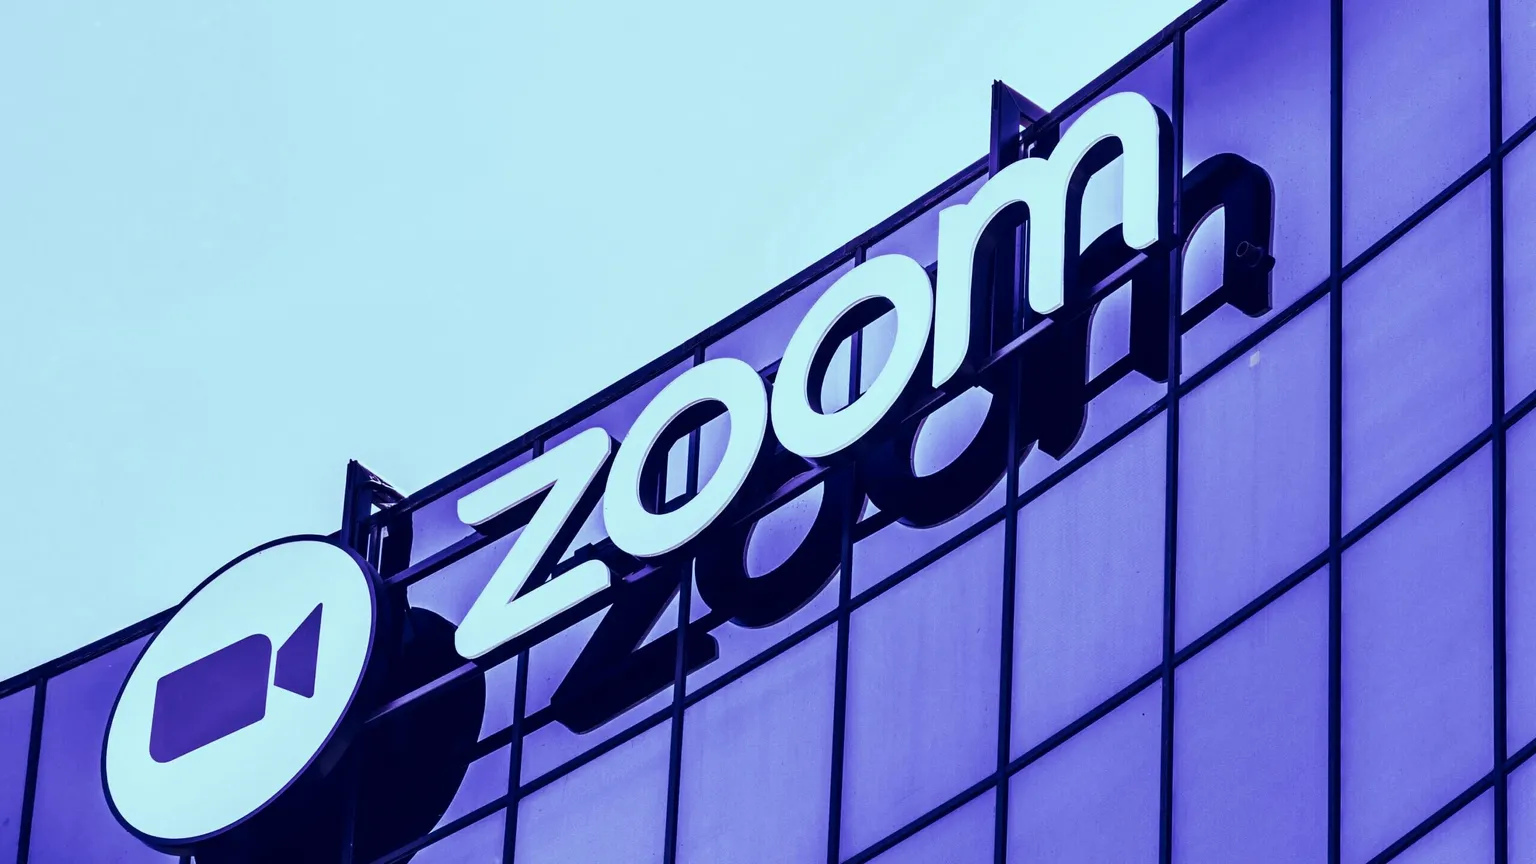 The Zoom logo on one of its buildings. (Image: Shutterstock)